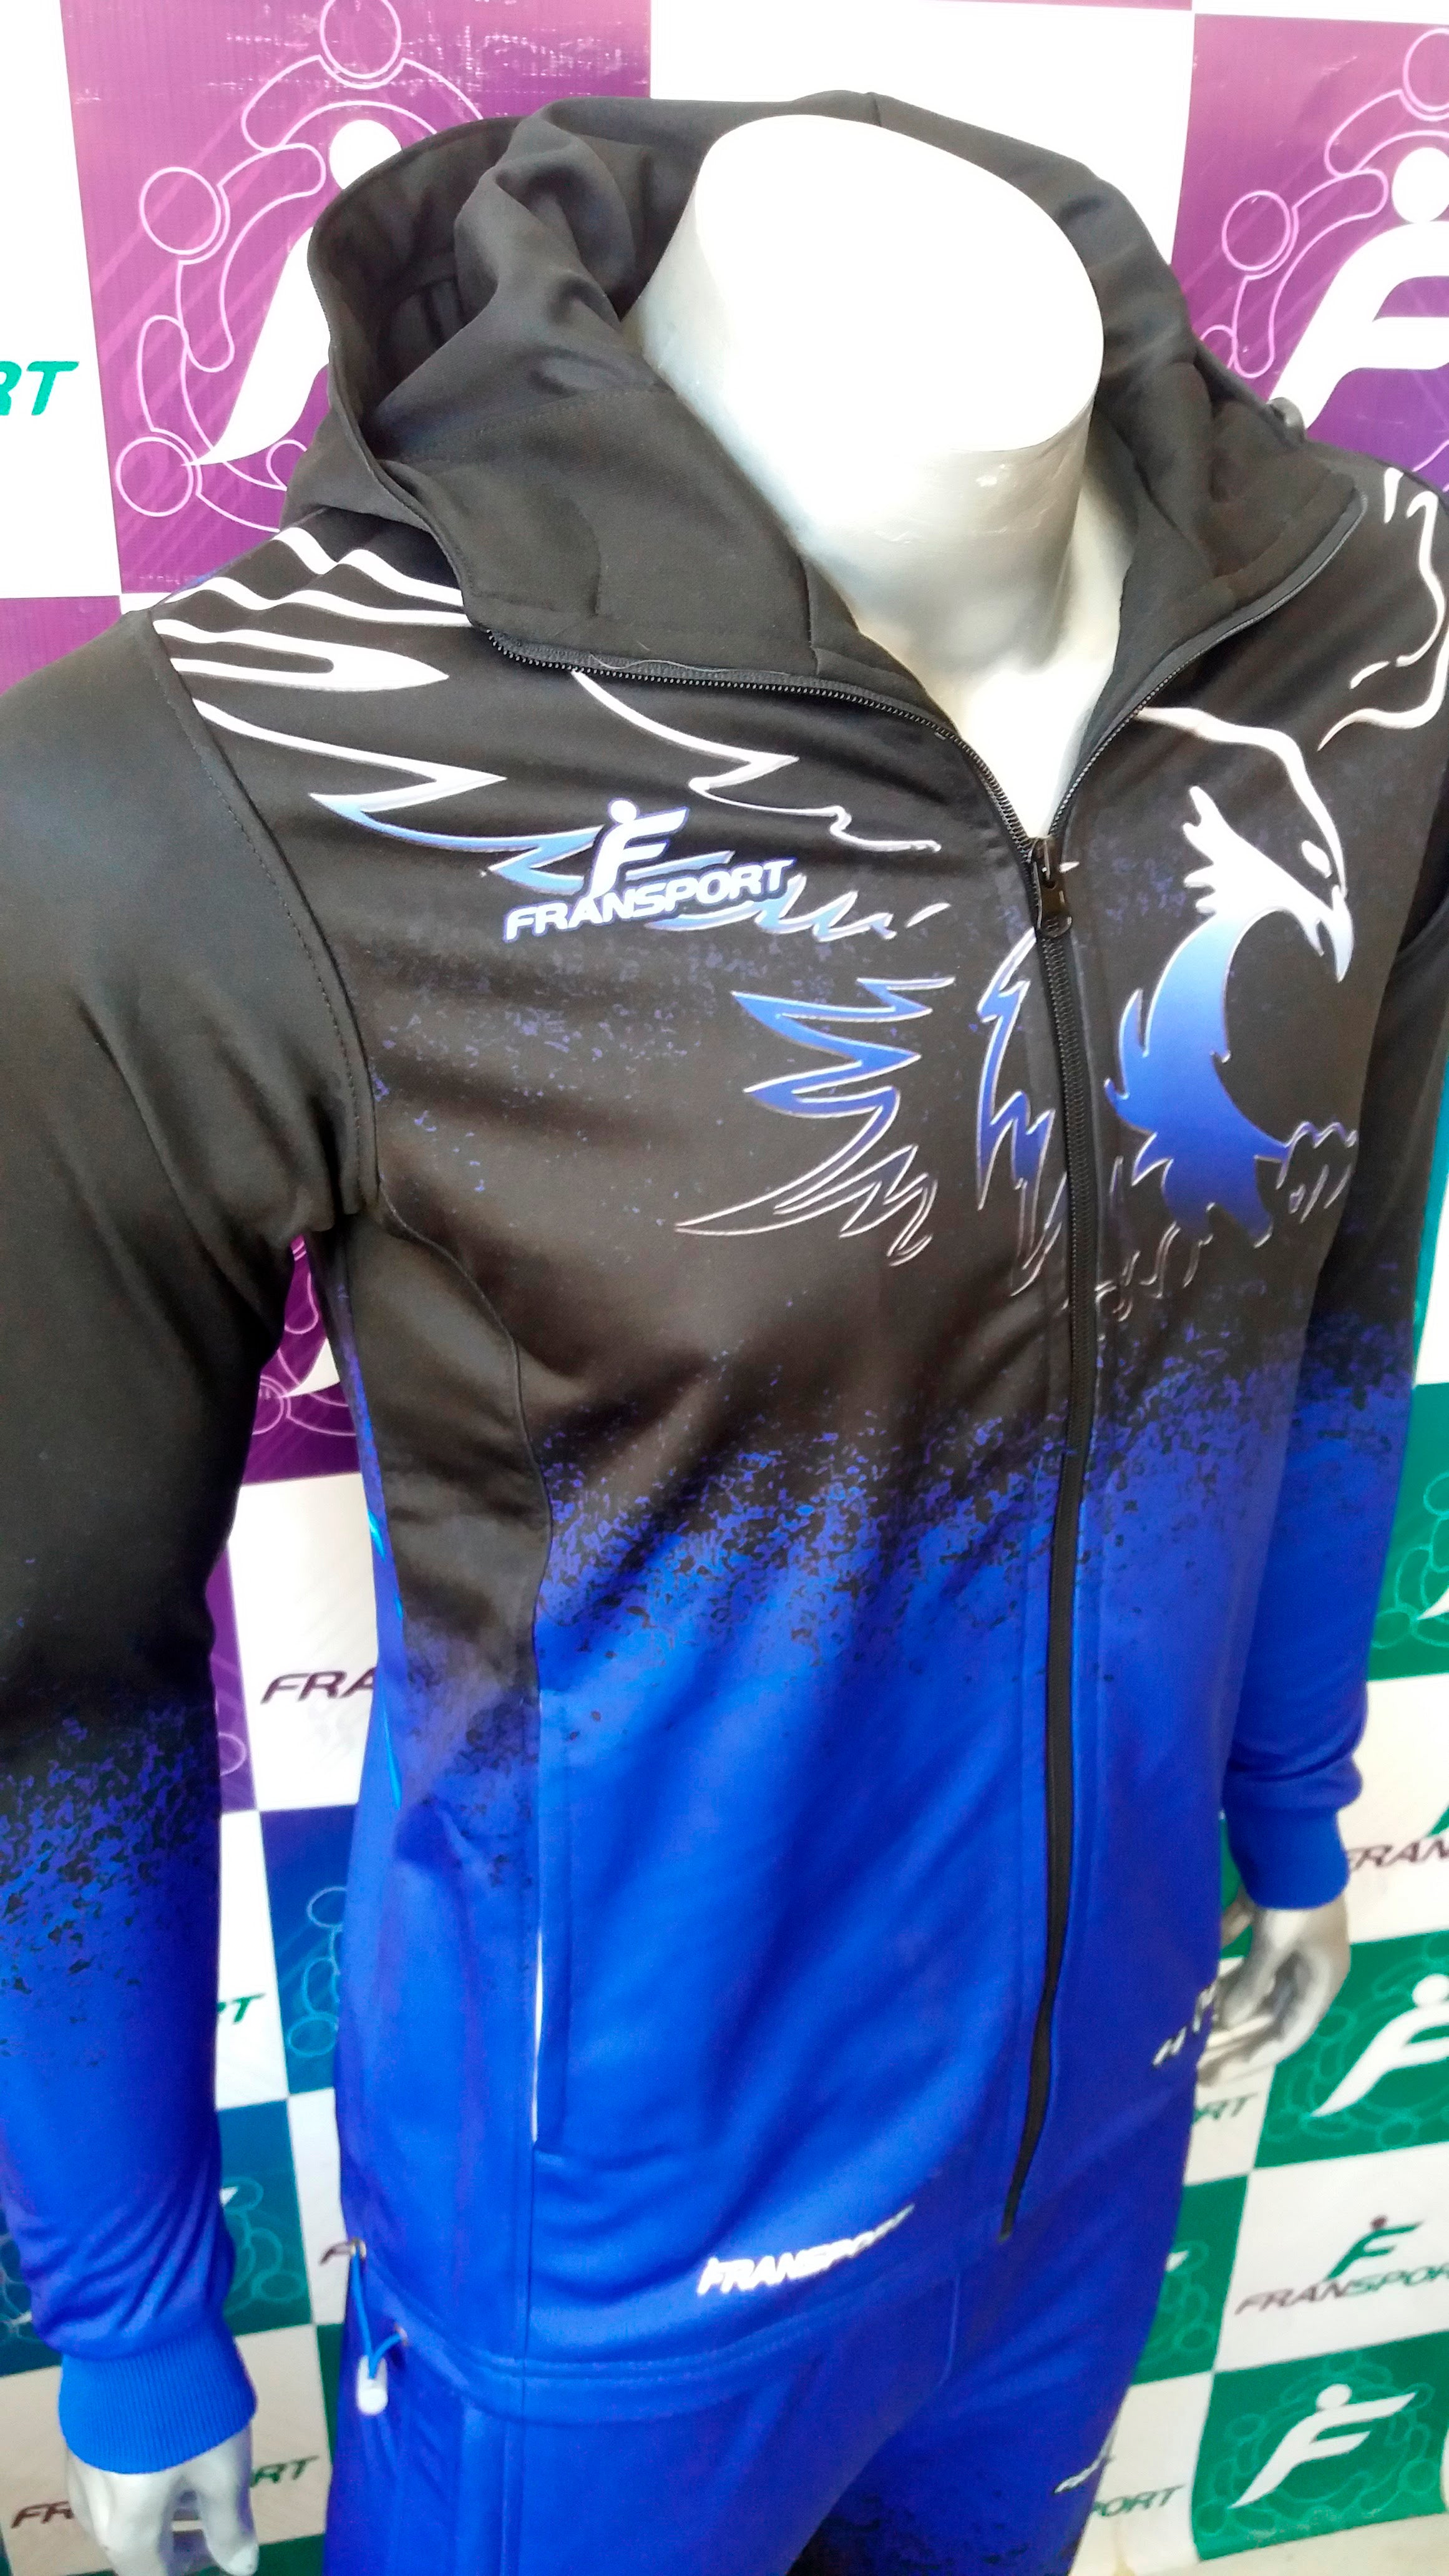 deportivo personalizable - Full sublimado Fransport Oficial